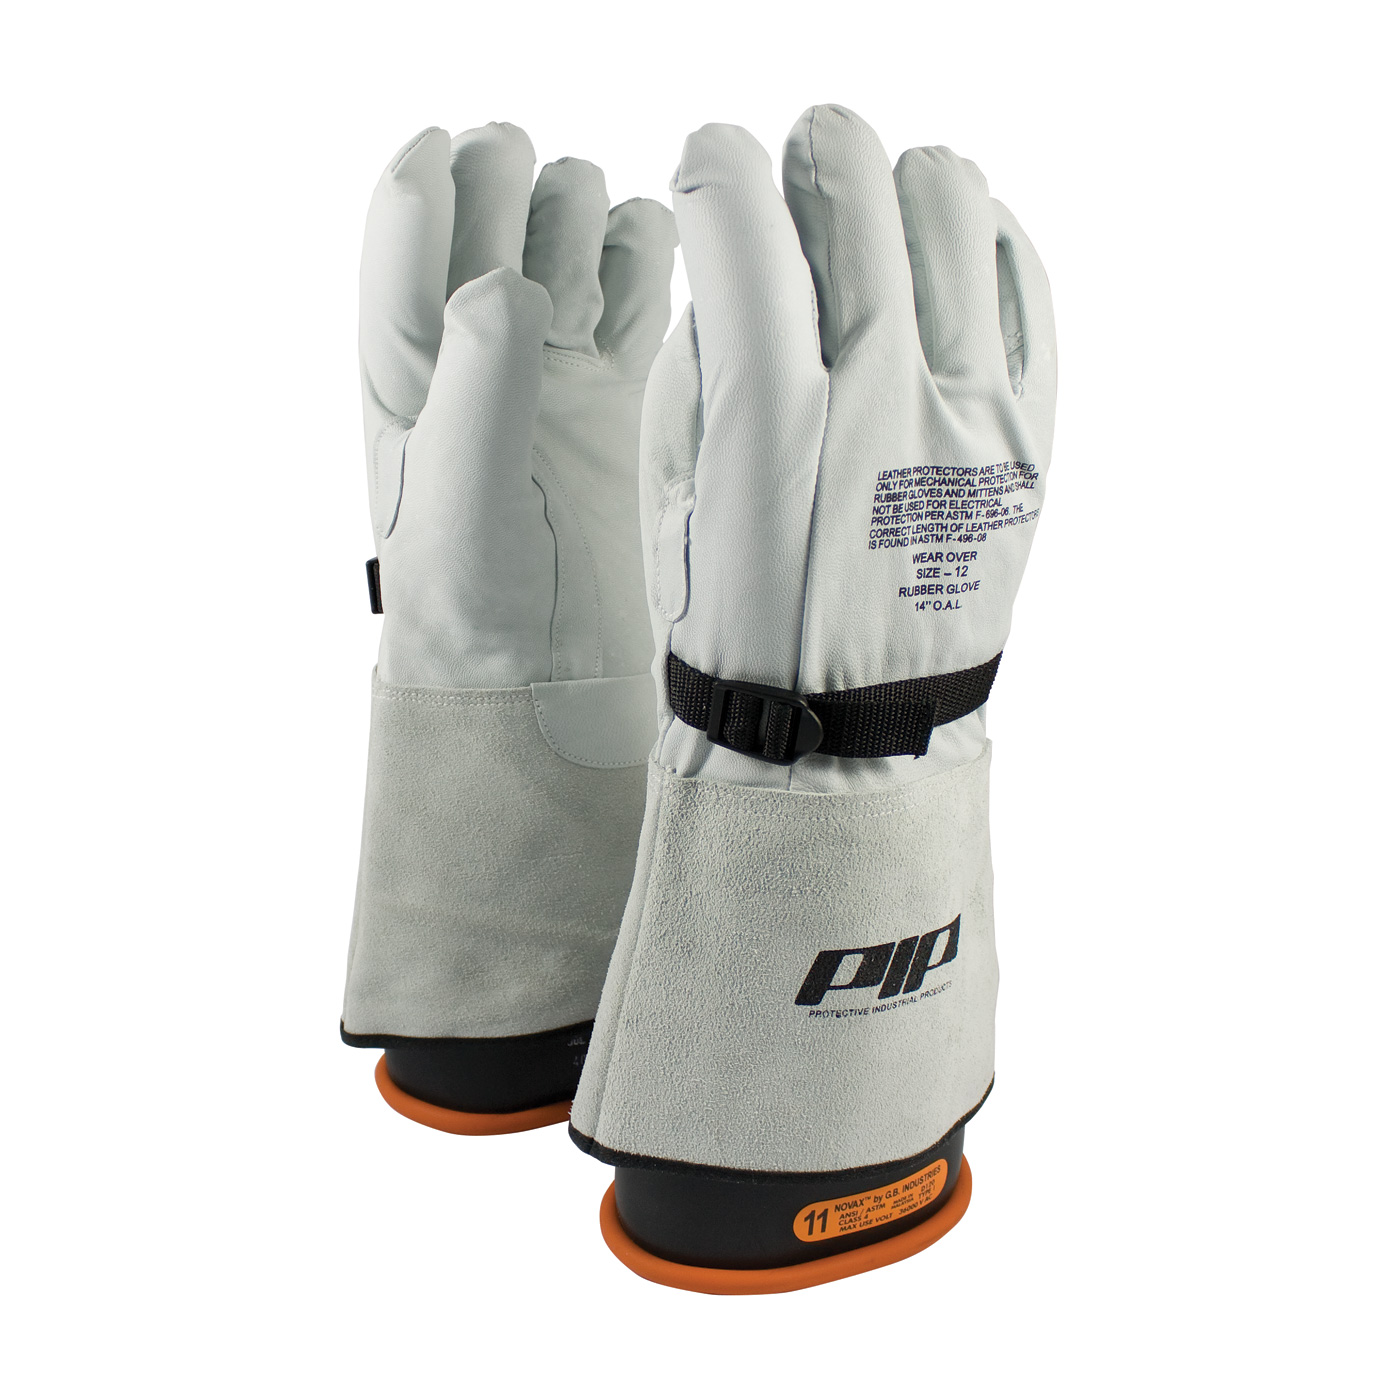 PIP 148-6000/10 Top Grain Goatskin Leather Protector for Novax Gloves with Gauntlet Cuff PID-148 6000 10